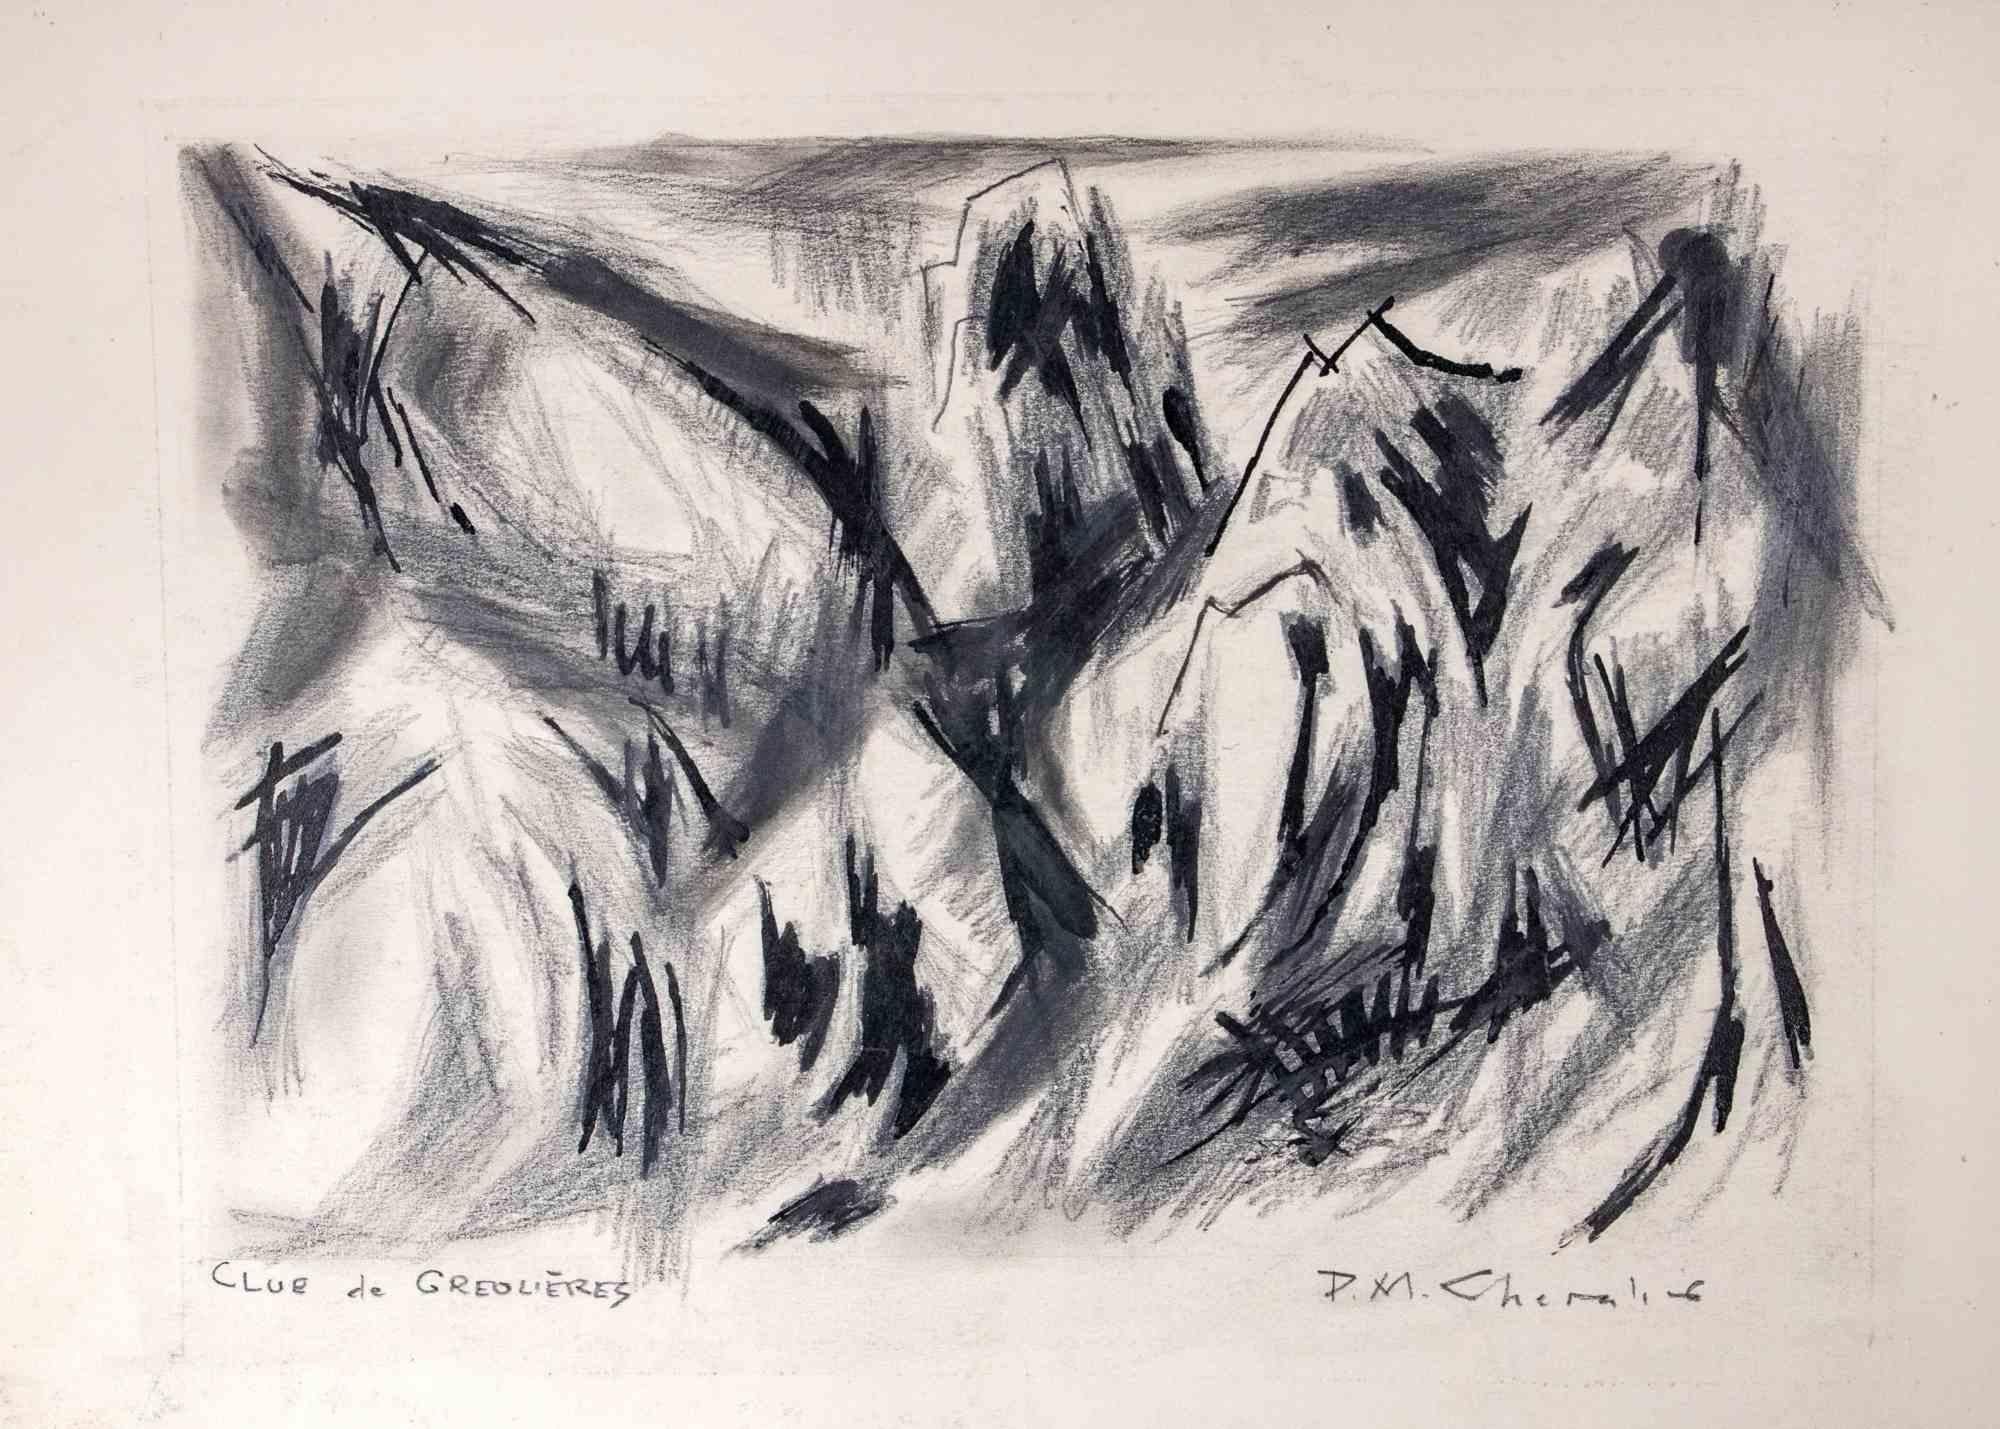 Mountains - Drawing by Paul-Maurice Chevalier - Early 20th Century